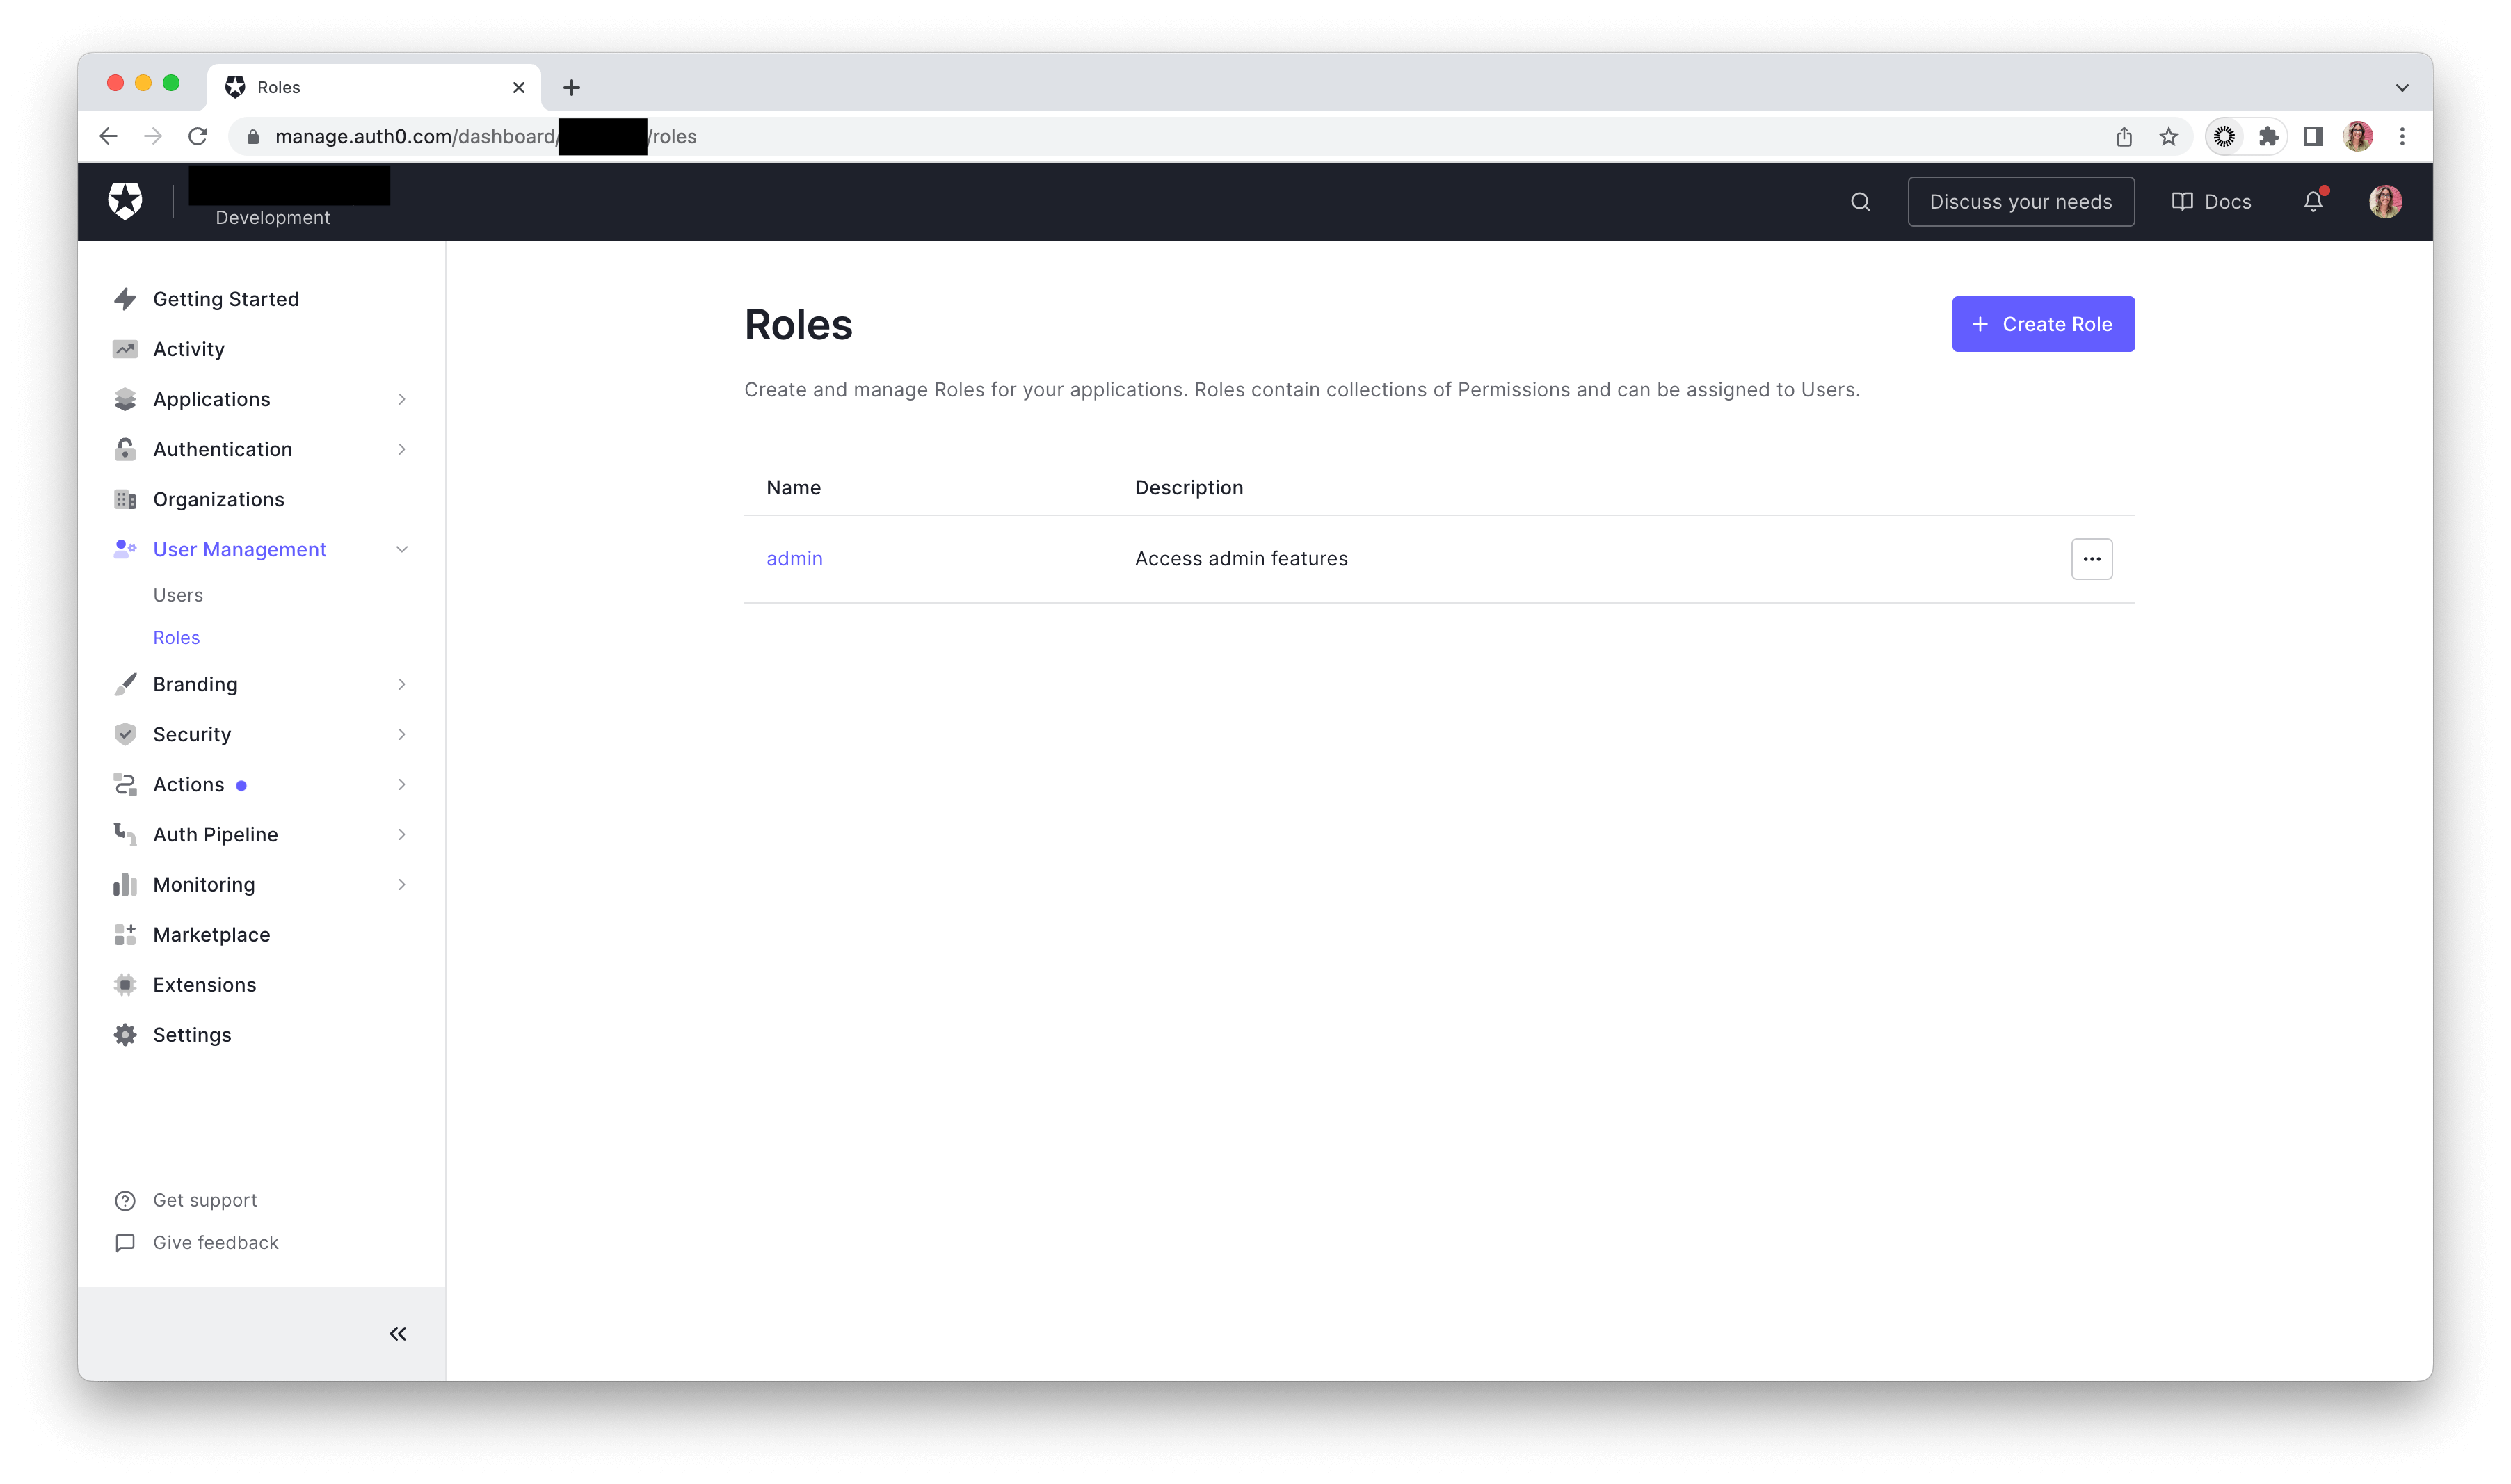 Create a new Role Auth0